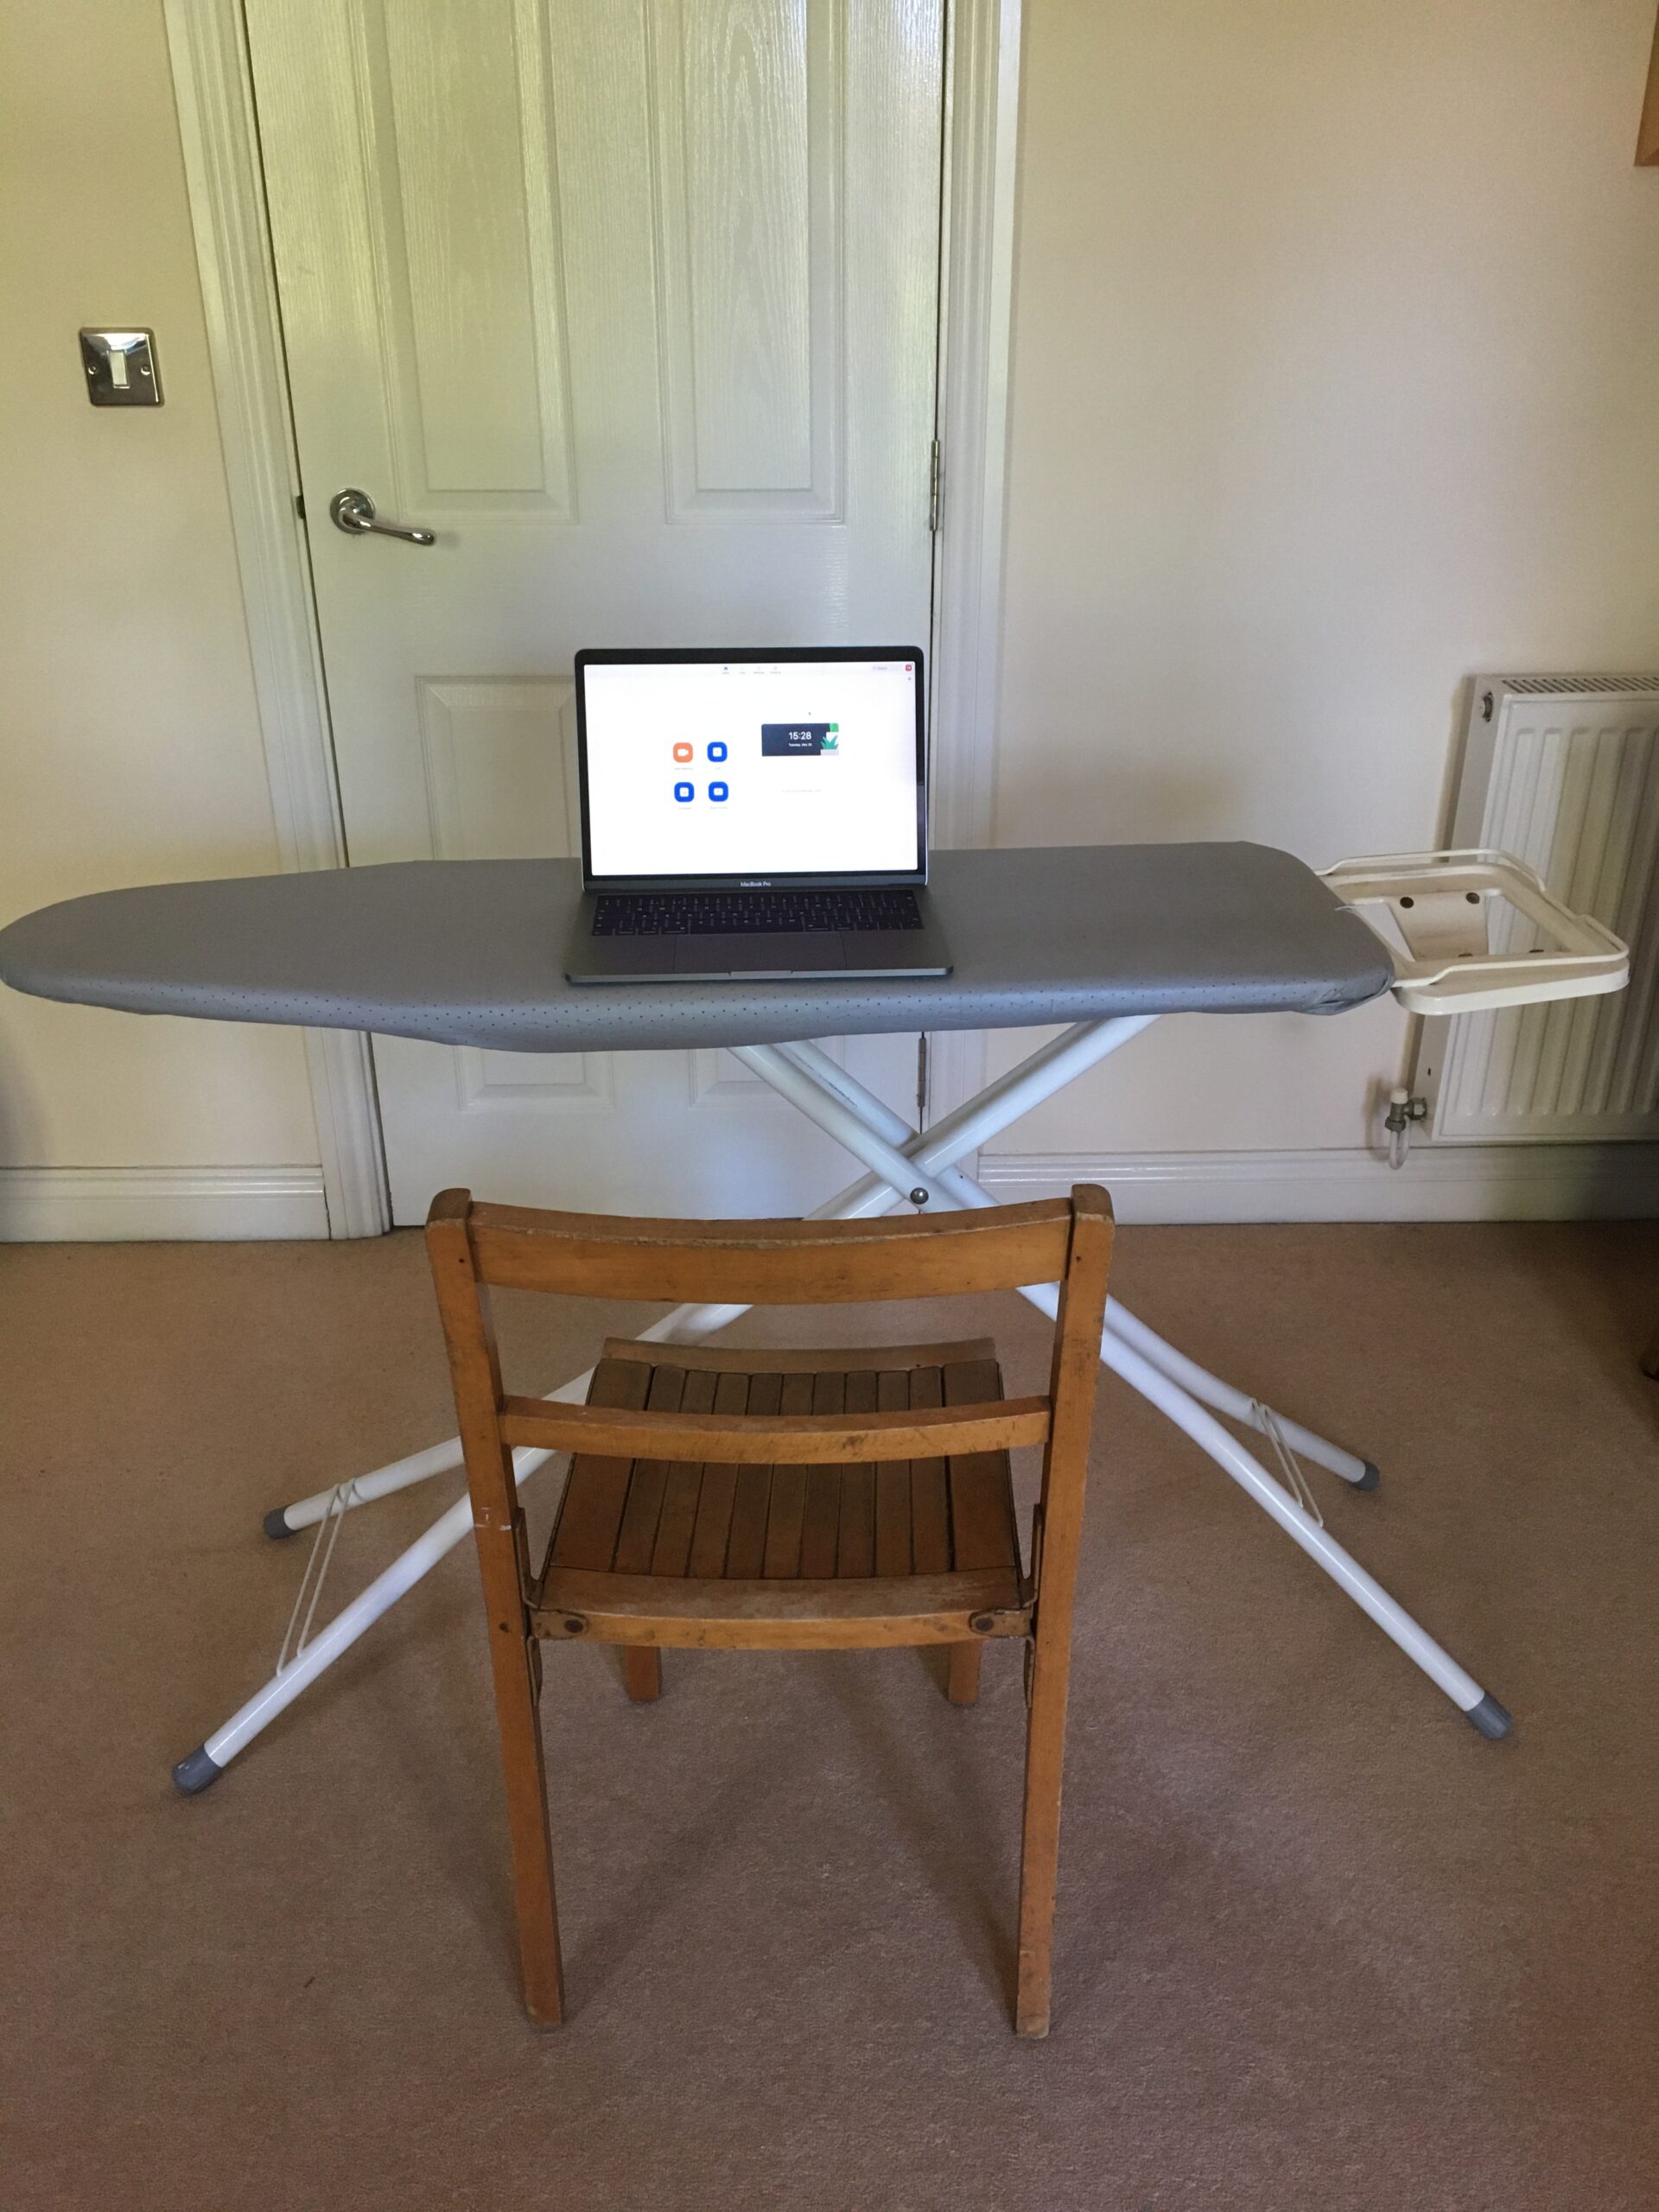 Working from home. Laptop open on an ironing board. Wooden chair in front of ironing board.